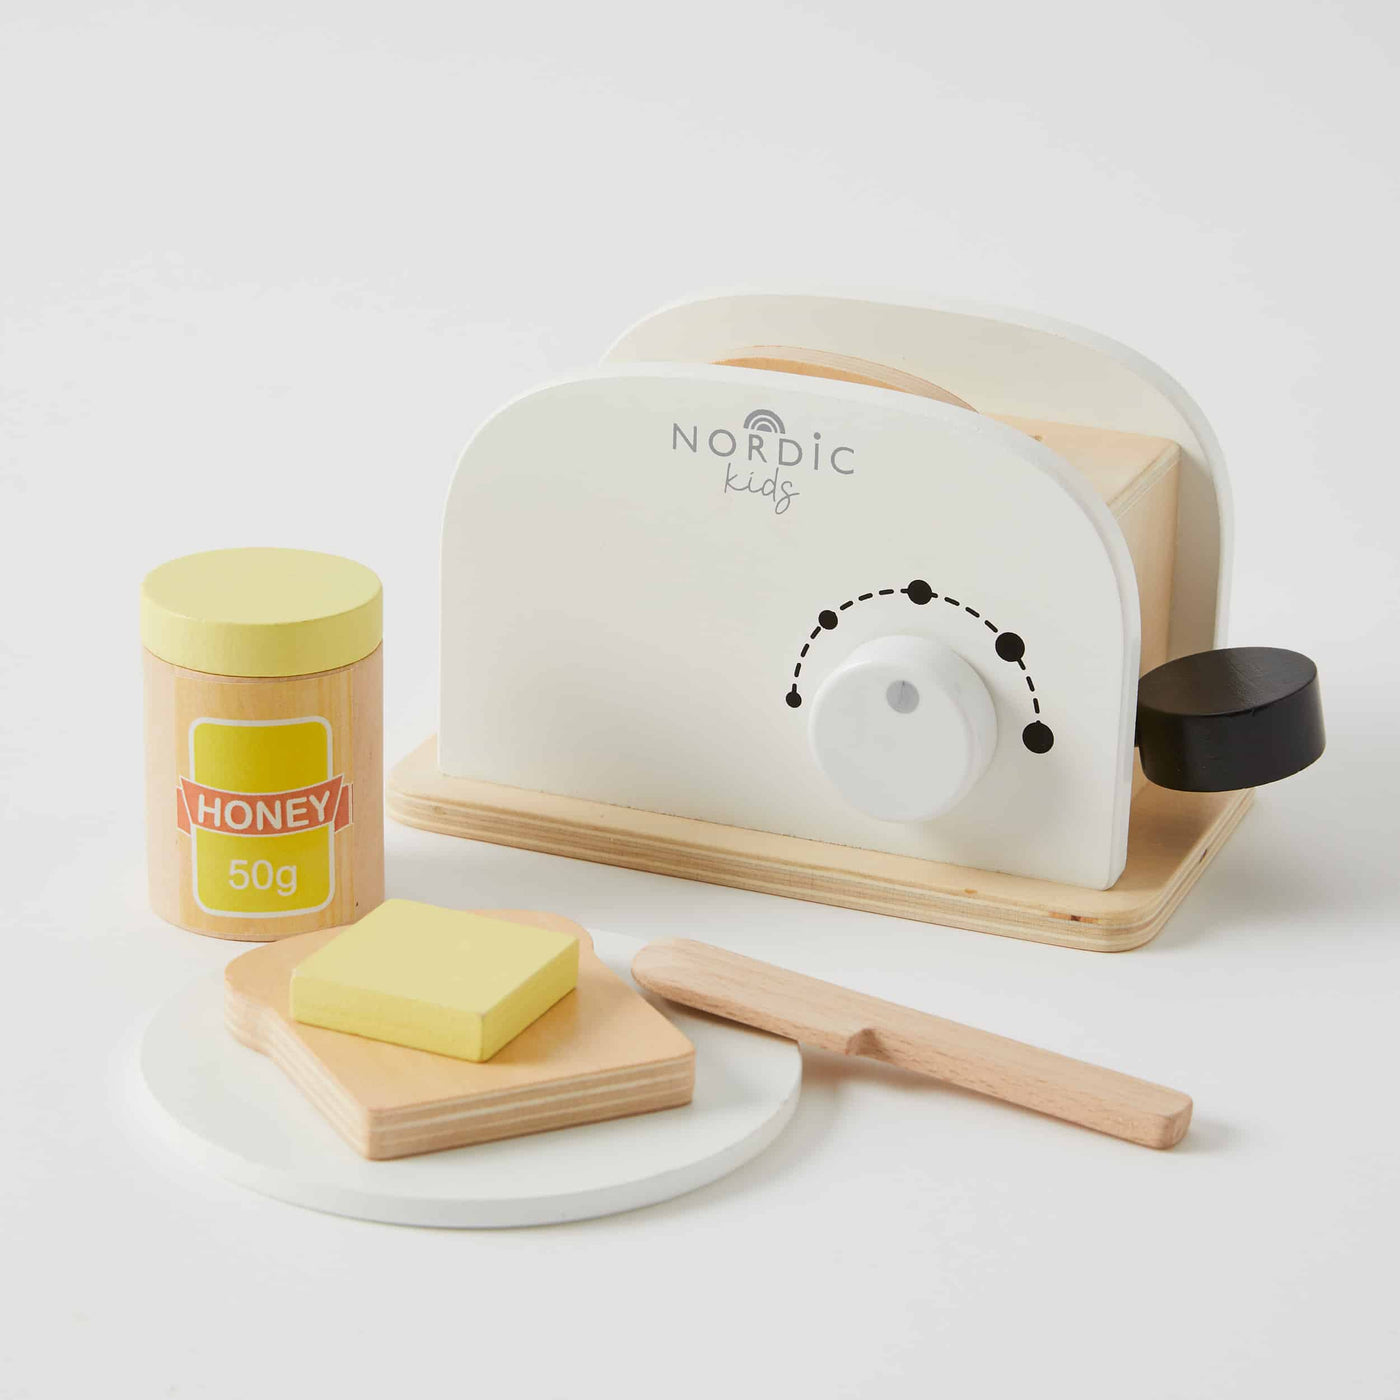 WOODEN TOASTER SET-Nordic Kids-Lima & Co